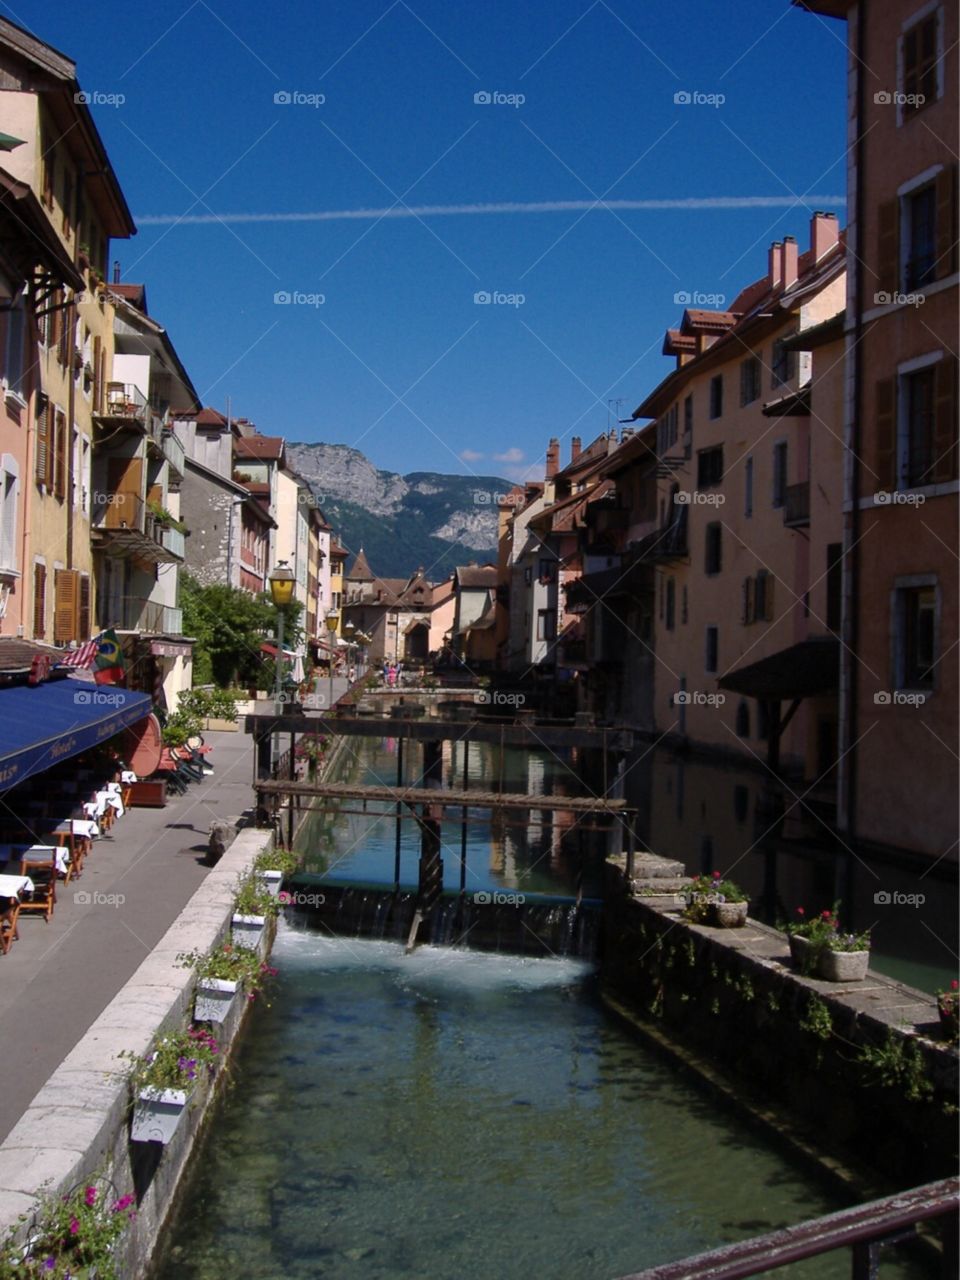 Narrow canal through the small town of Annecy, France. 